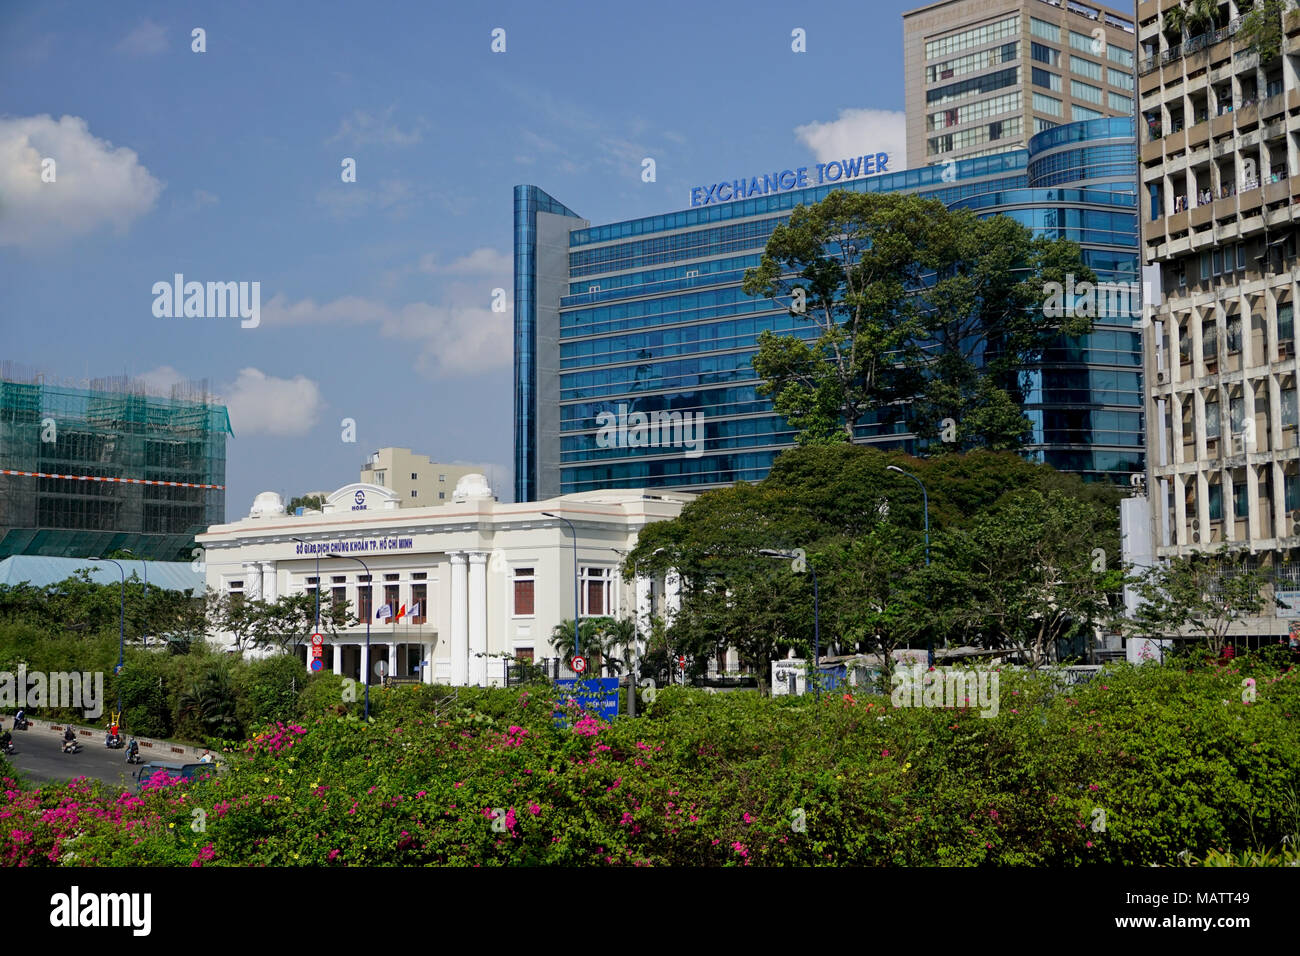 The Ho Chi Minh Stock Exchange and the Exchange Tower in District One, ( Saigon) Ho Chi Minh City, Vietnam Stock Photo - Alamy